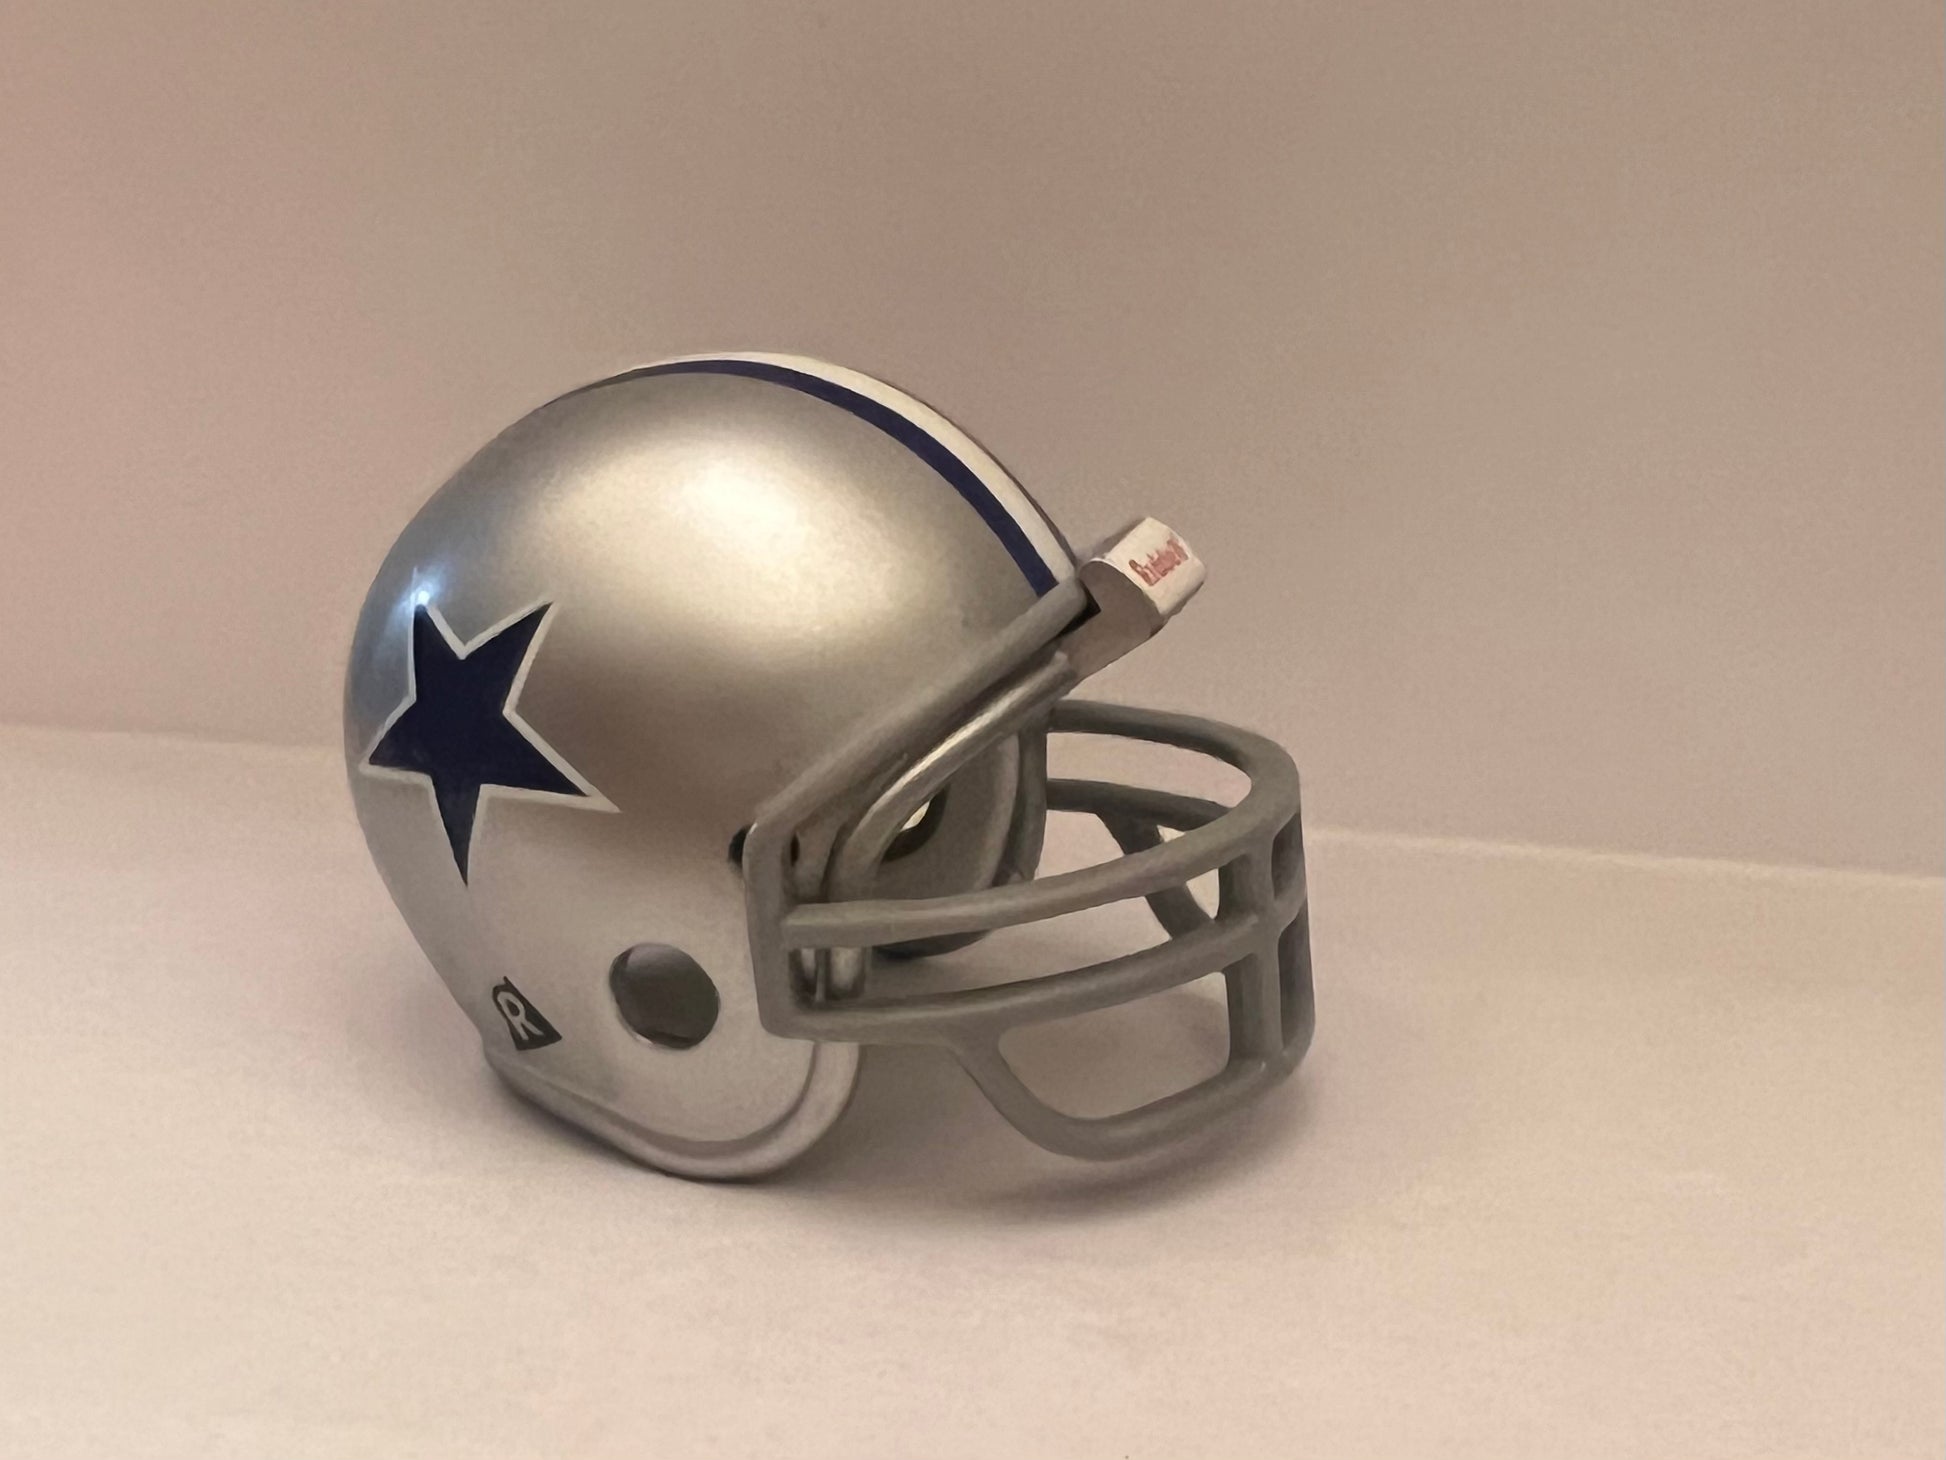 Dallas Cowboys Riddell NFL Pocket Pro Helmet 1964-1966 Throwback (Blue Star with only white border on silver Helmet) very rare  WESTBROOKSPORTSCARDS   